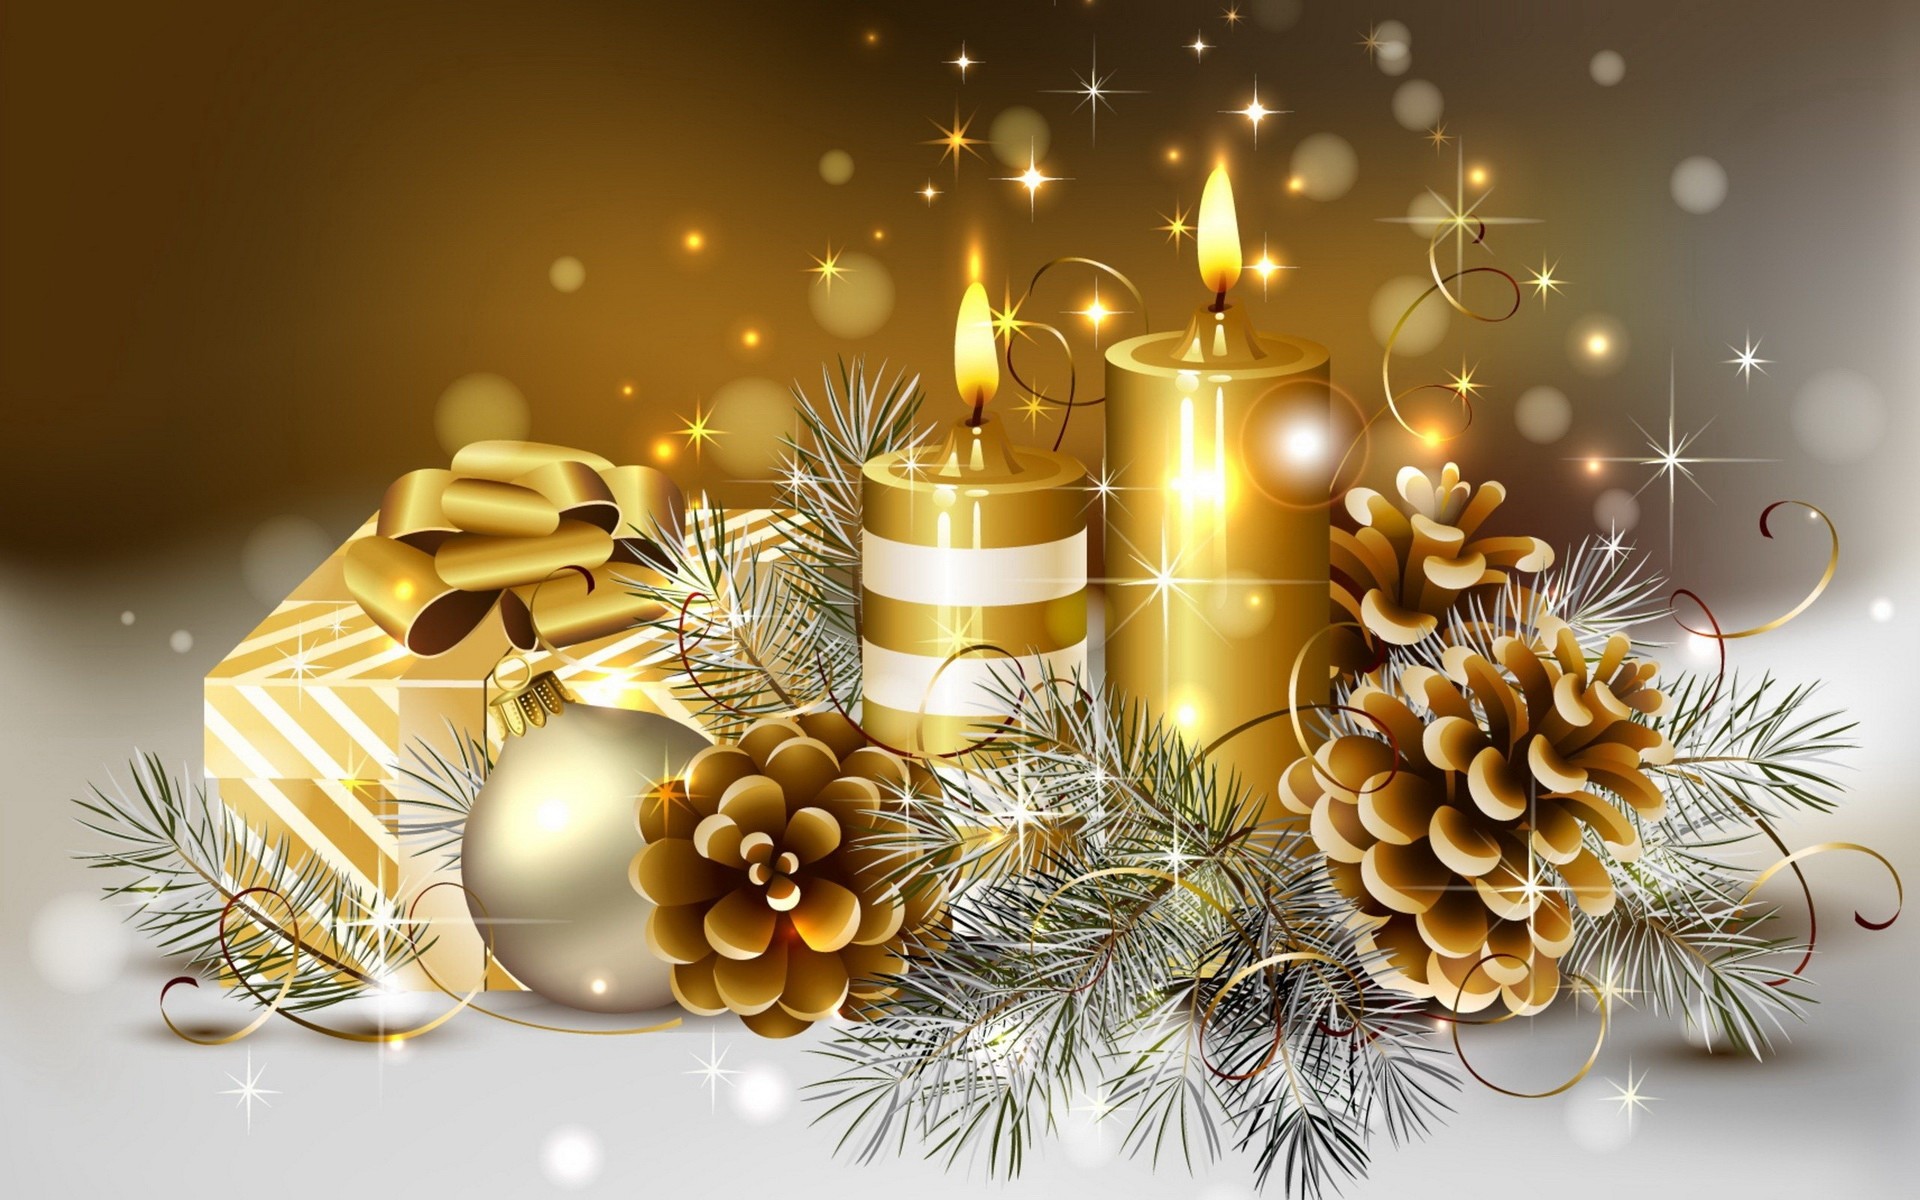 1920x1200 merry-christmas-wallpapers-free-hd-for-desktop